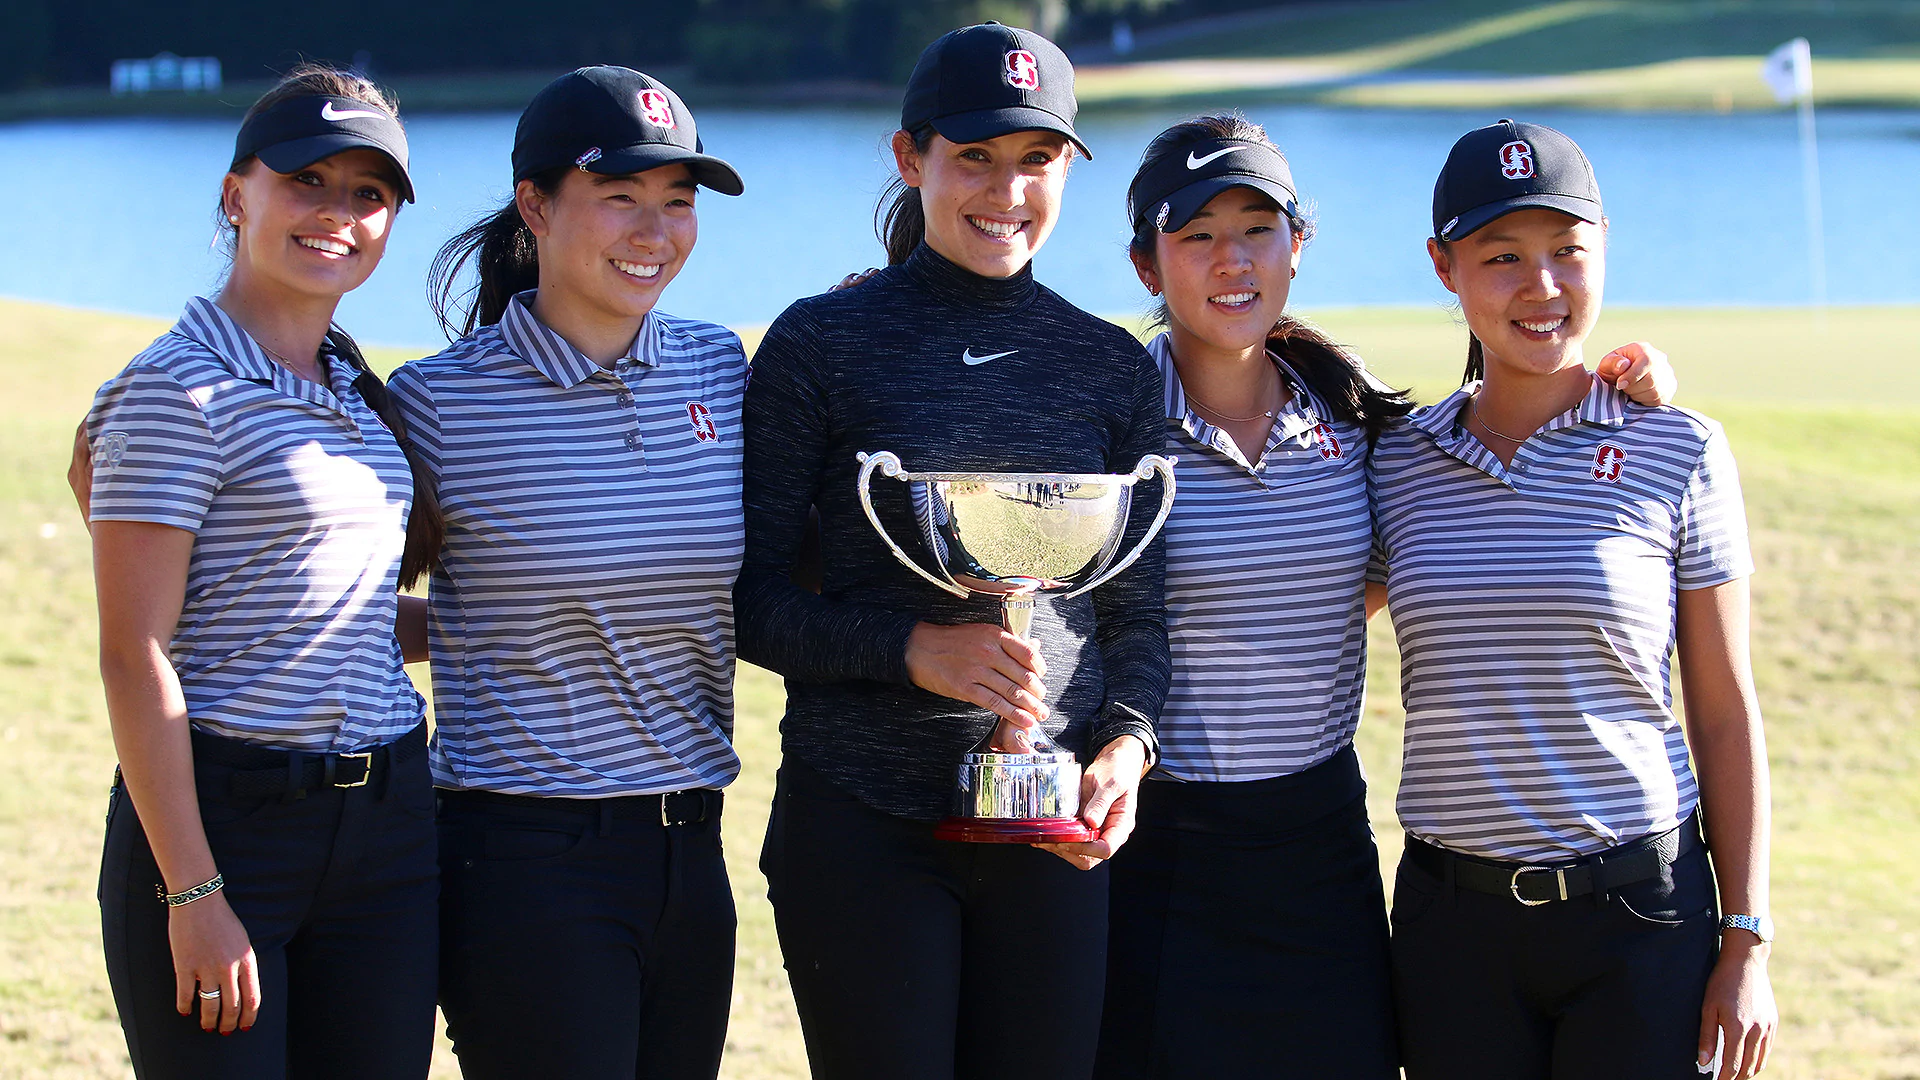 Valenzuela wins individual crown; Stanford top seed at East Lake Cup